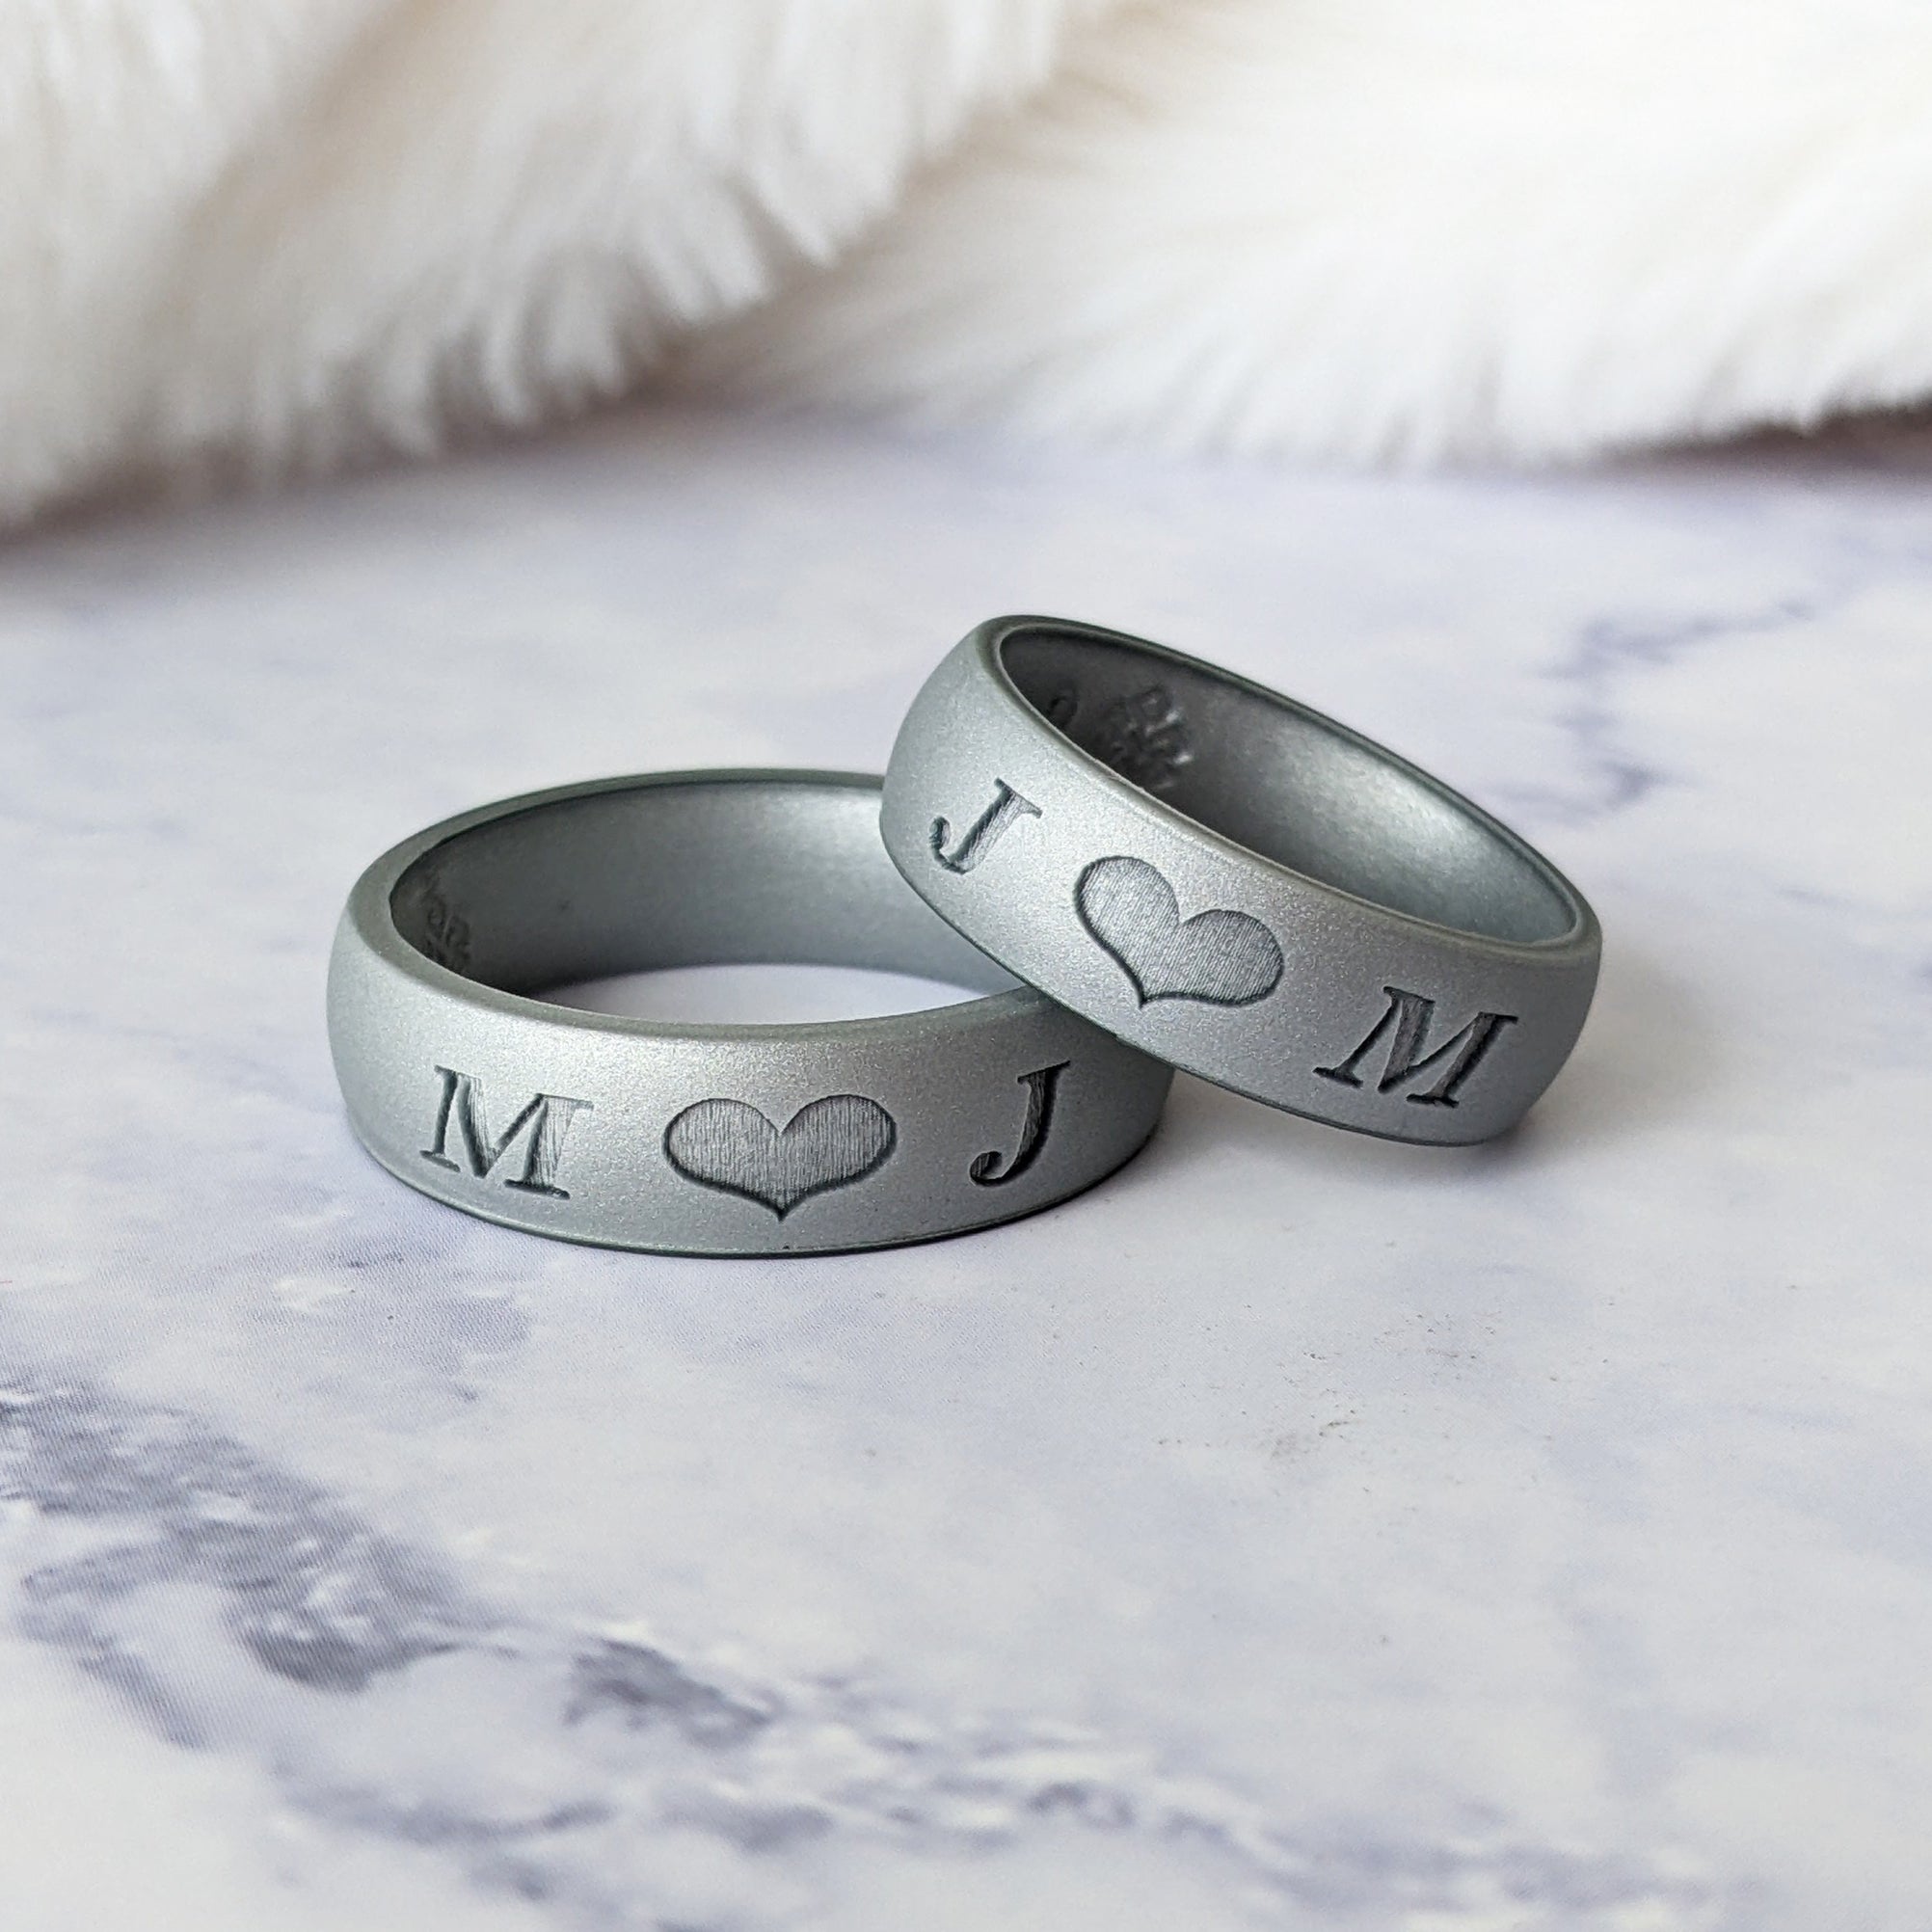 Beloved: 6mm Classic Love Engraved Stainless Steel Wedding Band -  1000Jewels.com